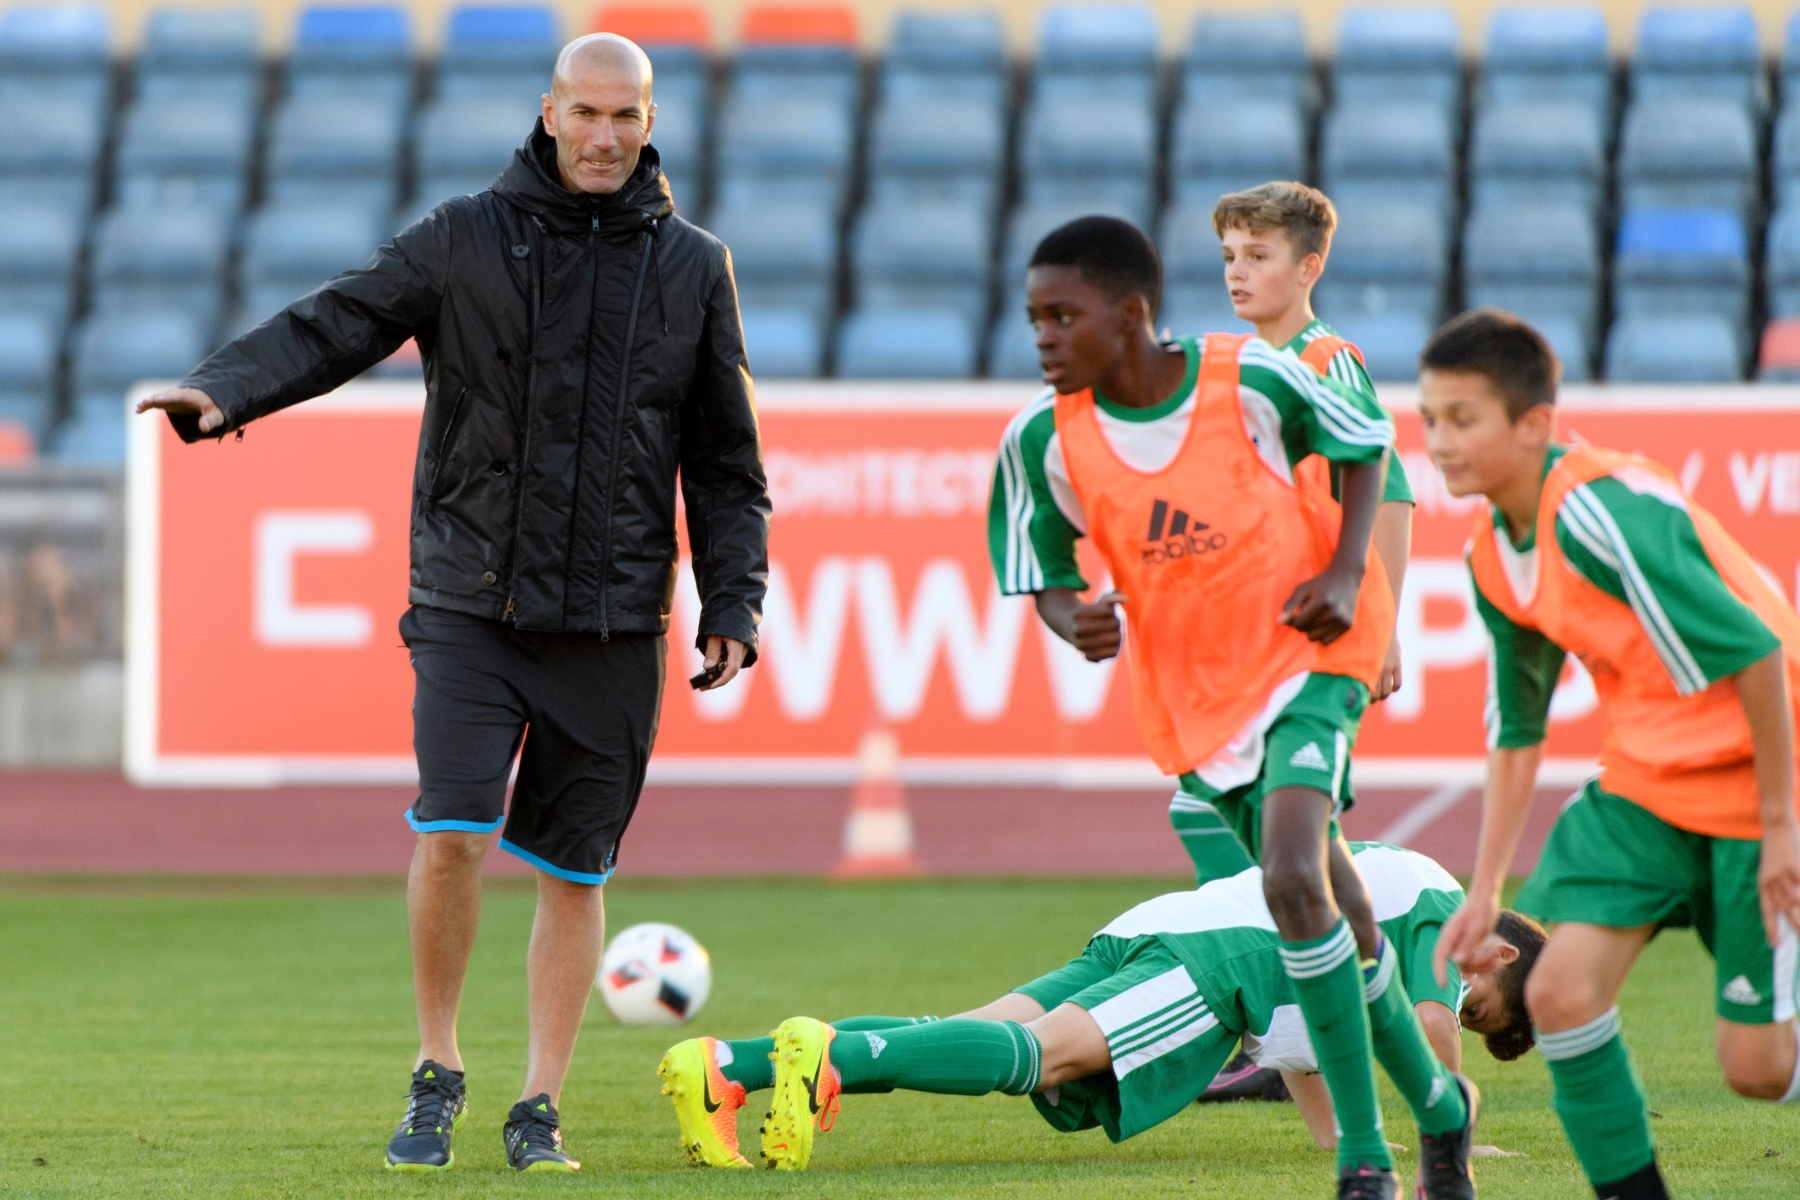 Real Madrid's head coach Zinedine Zidane of France during a training session with young soccer players in the Stade Olympique de la Pontaise in Lausanne, Switzerland, Monday, October 3, 2016. Zinedine Zidane is in Lausanne for the soccer association "Passion Foot"  to train young soccer players from the canton of Vaud in cooperation with the Swiss football club FC Lausanne-Sport. (KEYSTONE/Laurent Gillieron) SWITZERLAND SOCCER REAL MADRID ZIDANE